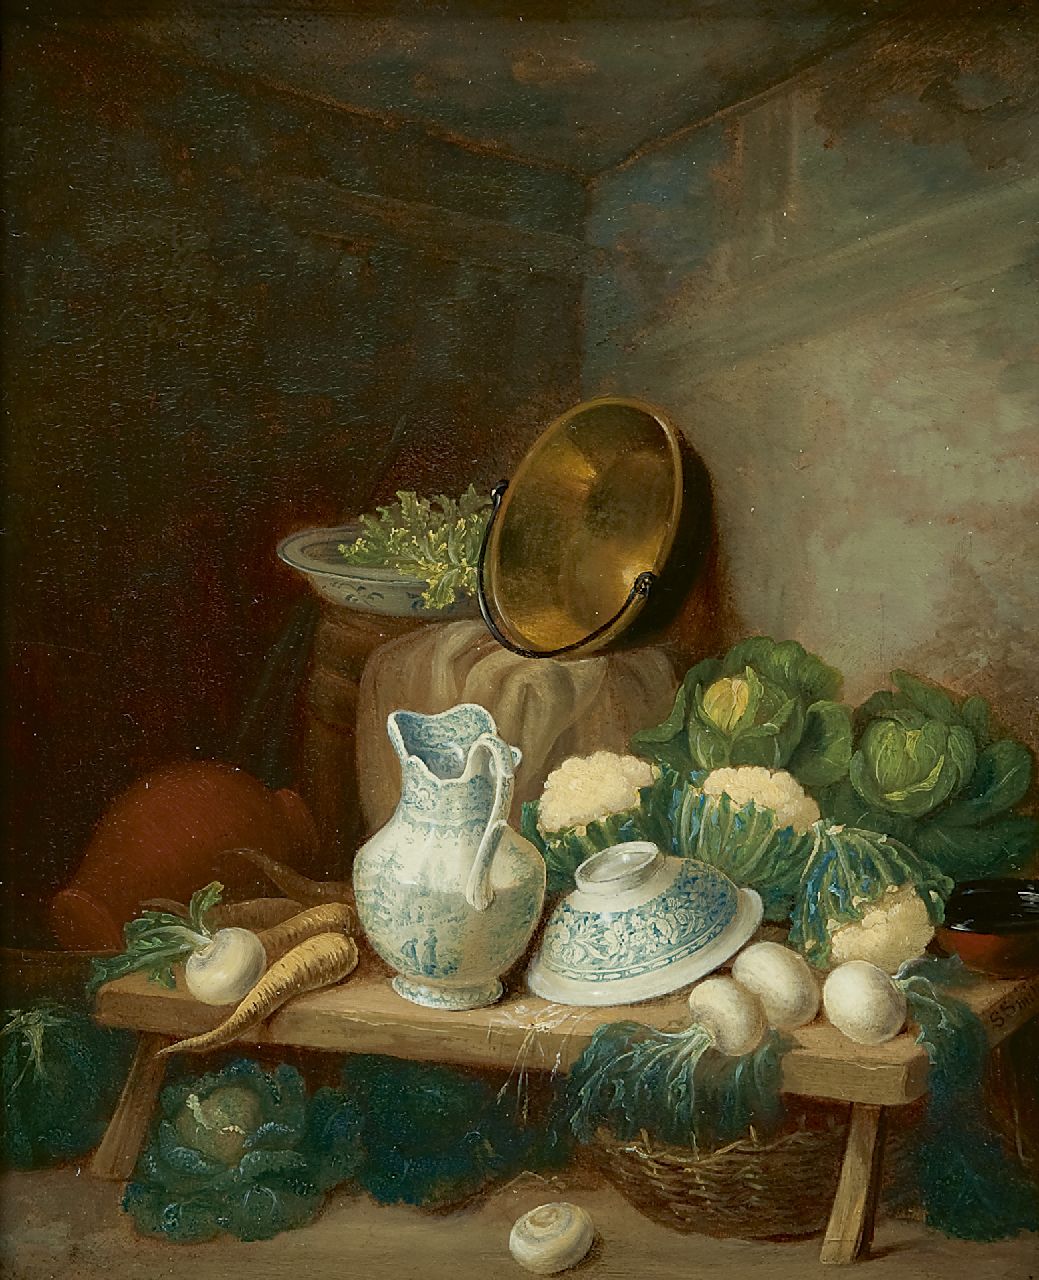 Smith S.  | Samuel Smith, A kitchen still life, Öl auf Malereifaser 21,7 x 17,9 cm, signed l.r. on the edge of table